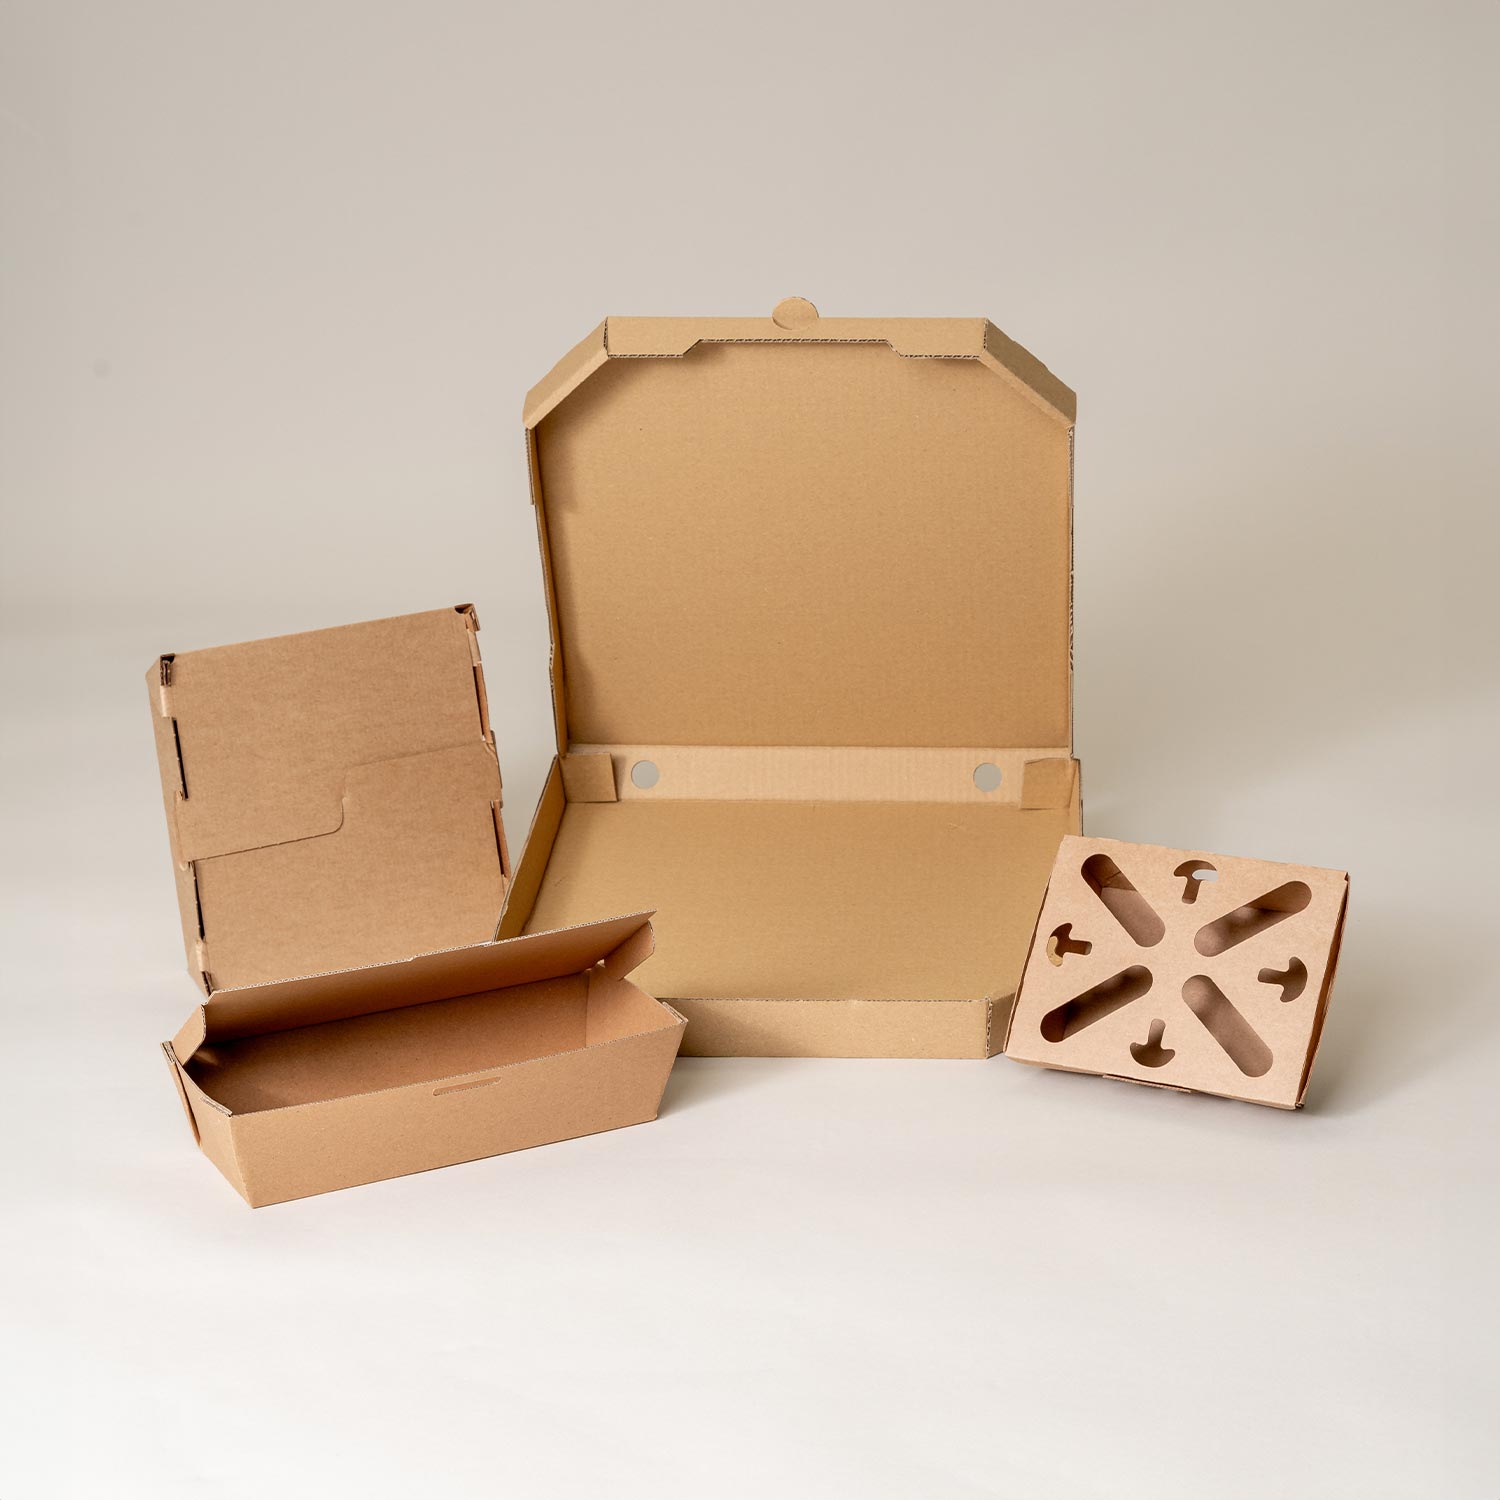 Food packaging from THIMM